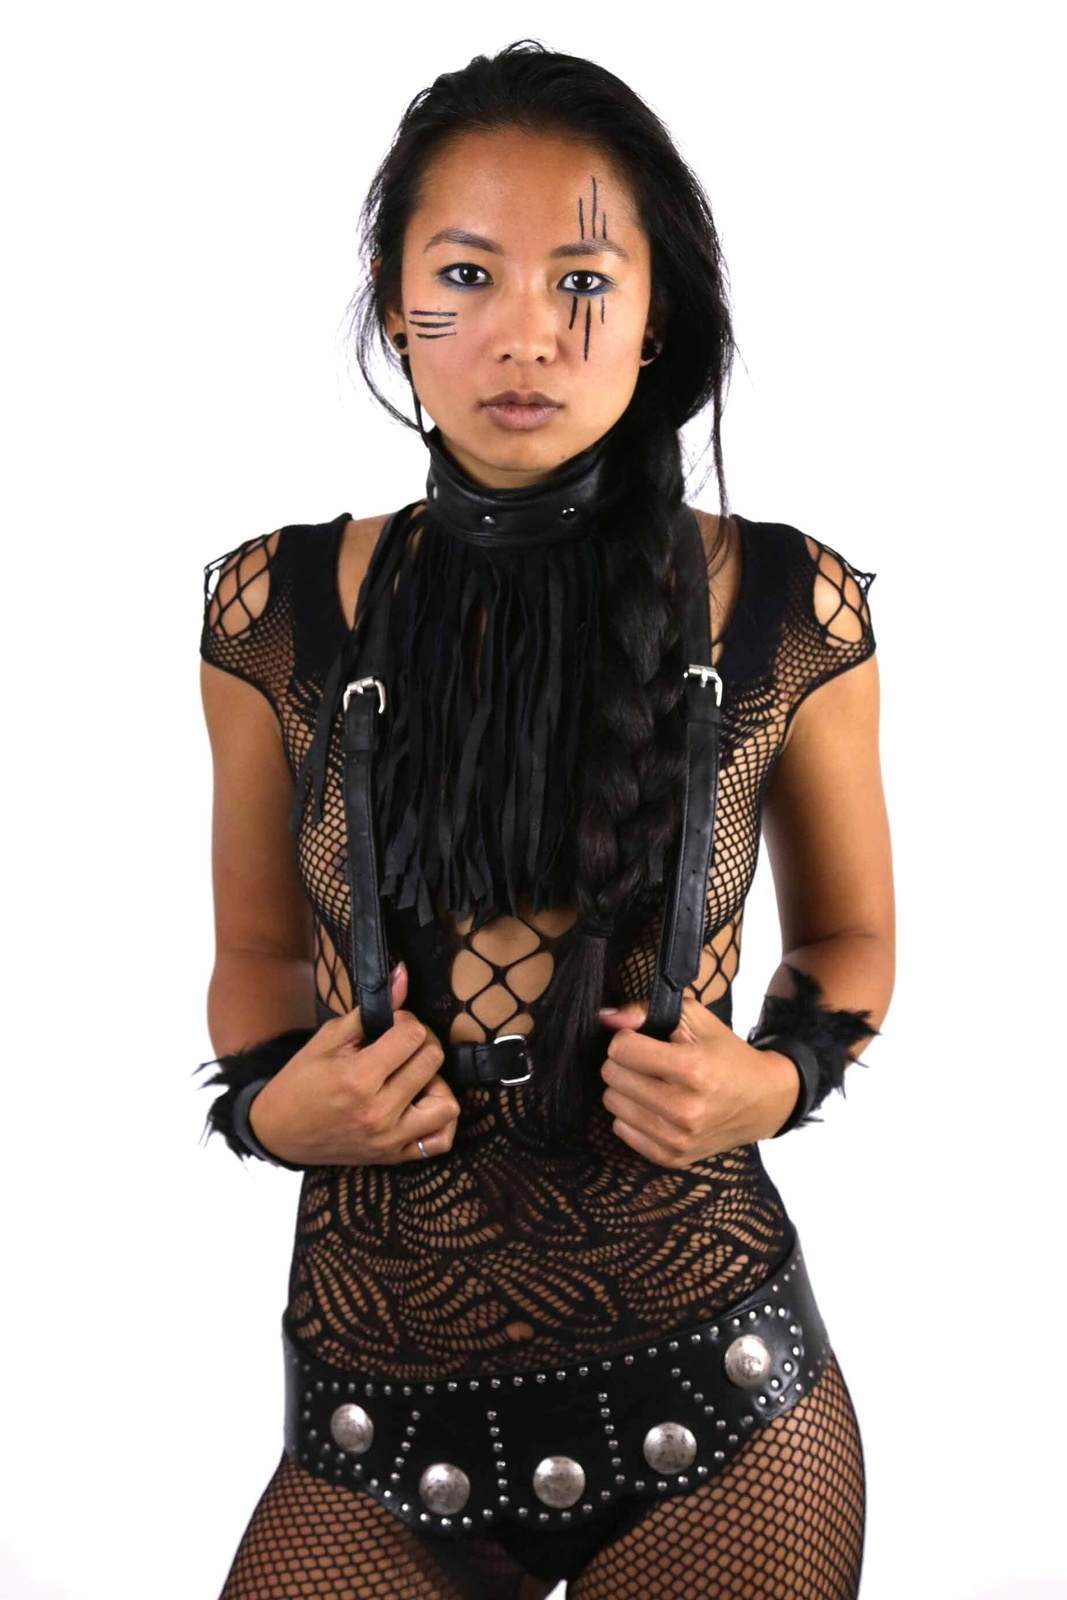 leather harness women by Love Khaos festival clothing brand